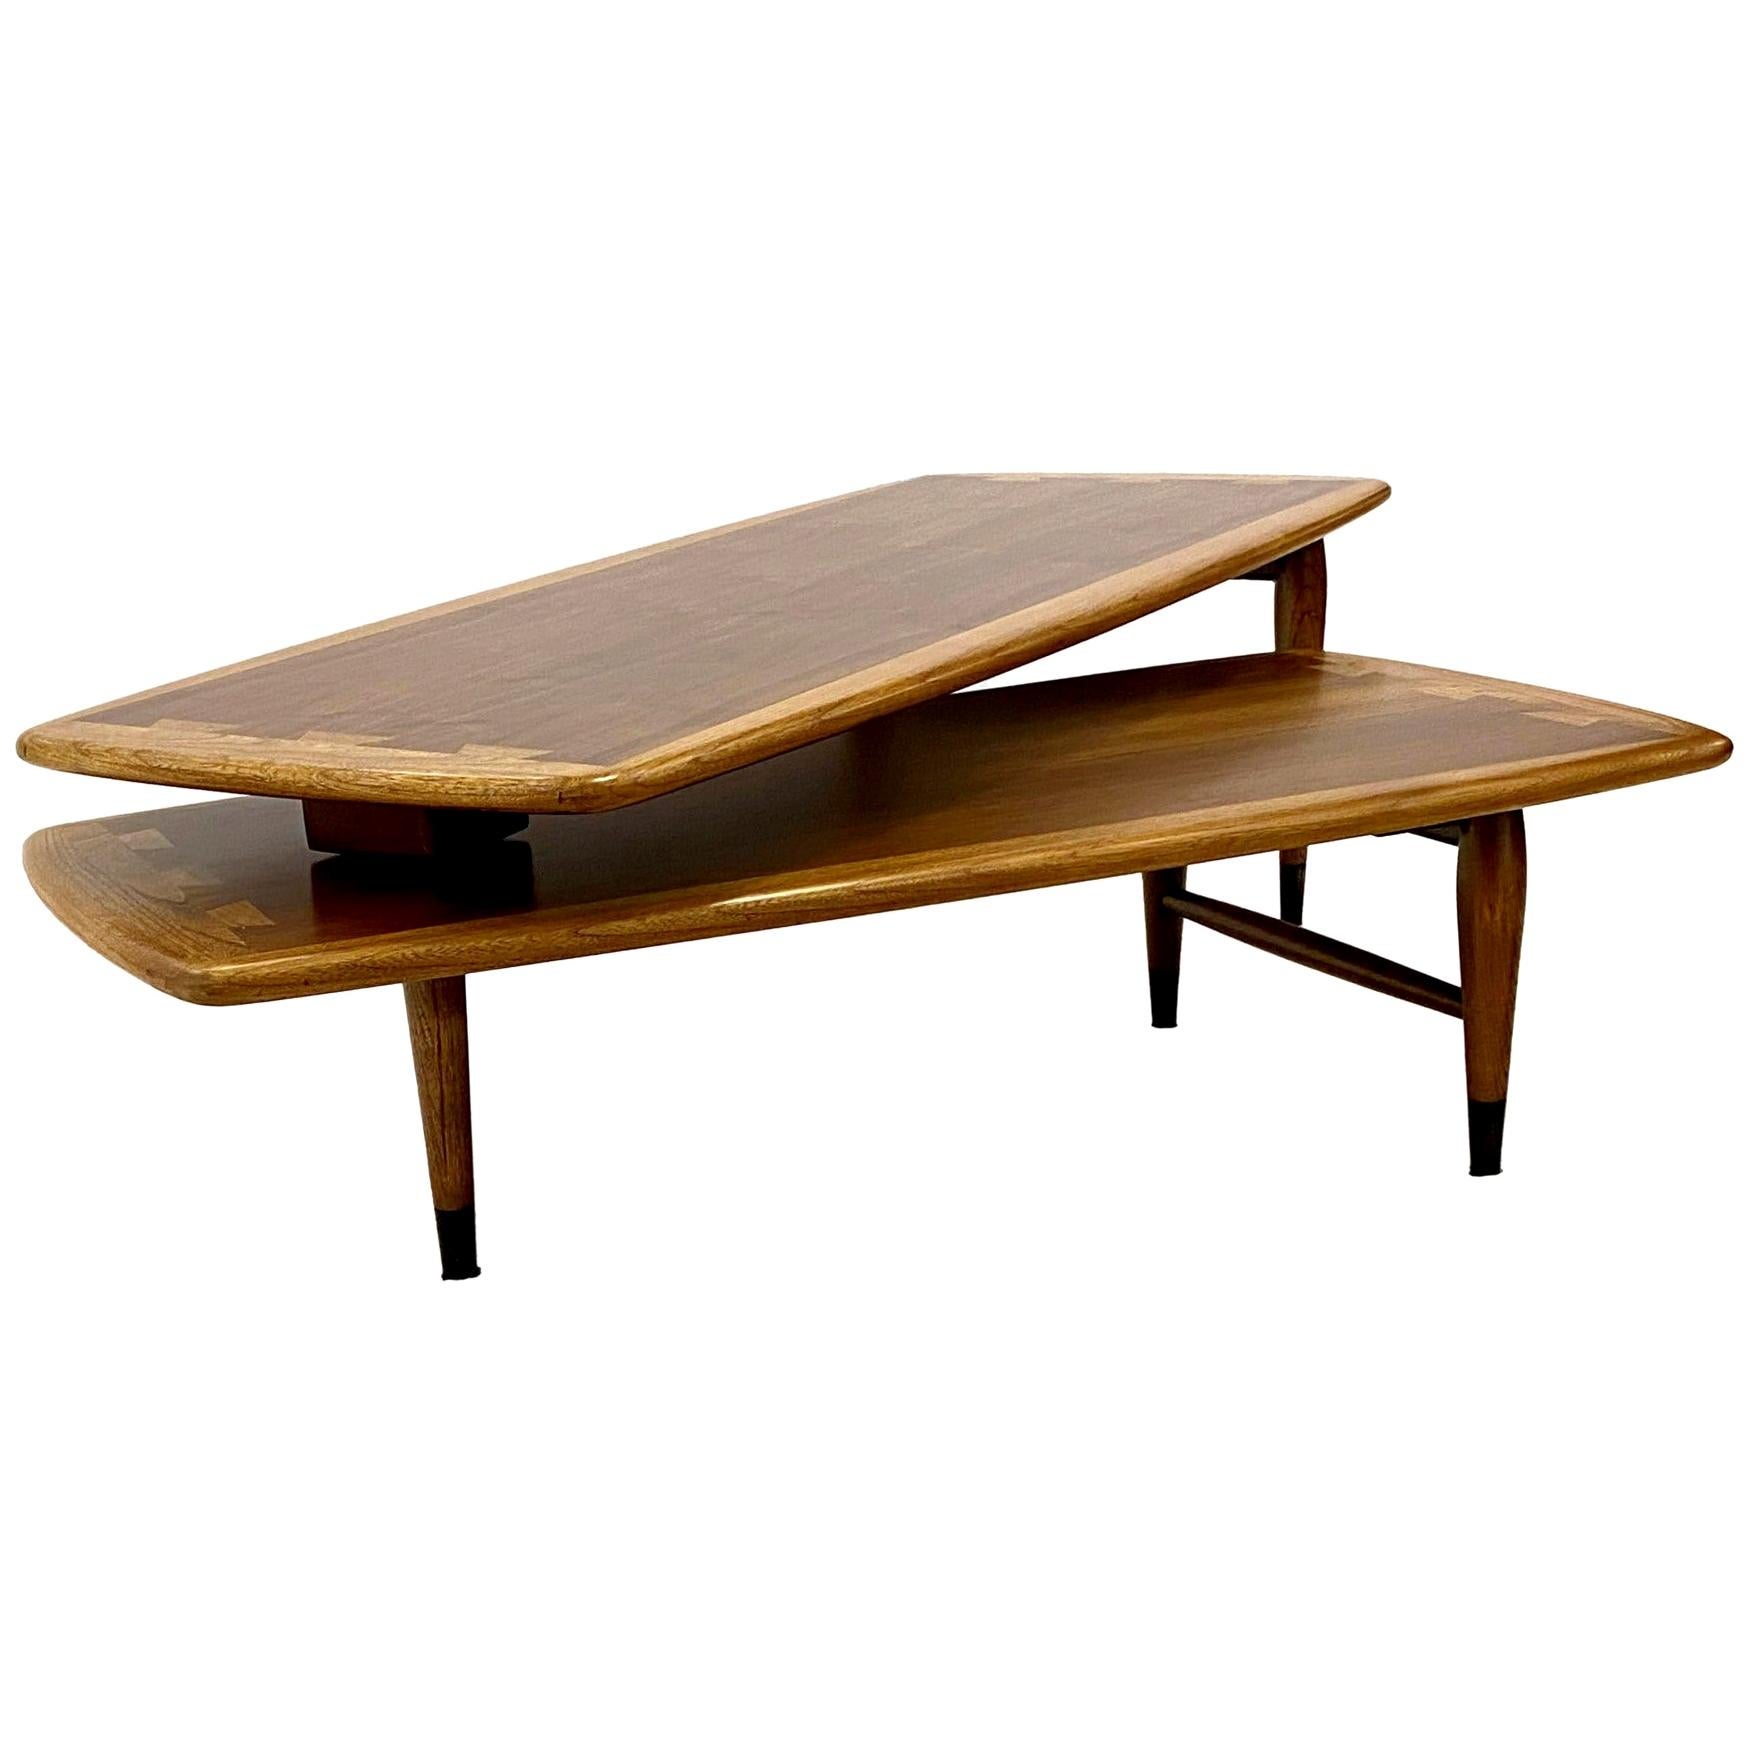 1960s Lane Switchblade Coffee Table Acclaim Two-Piece Adjustable by Andre Bus